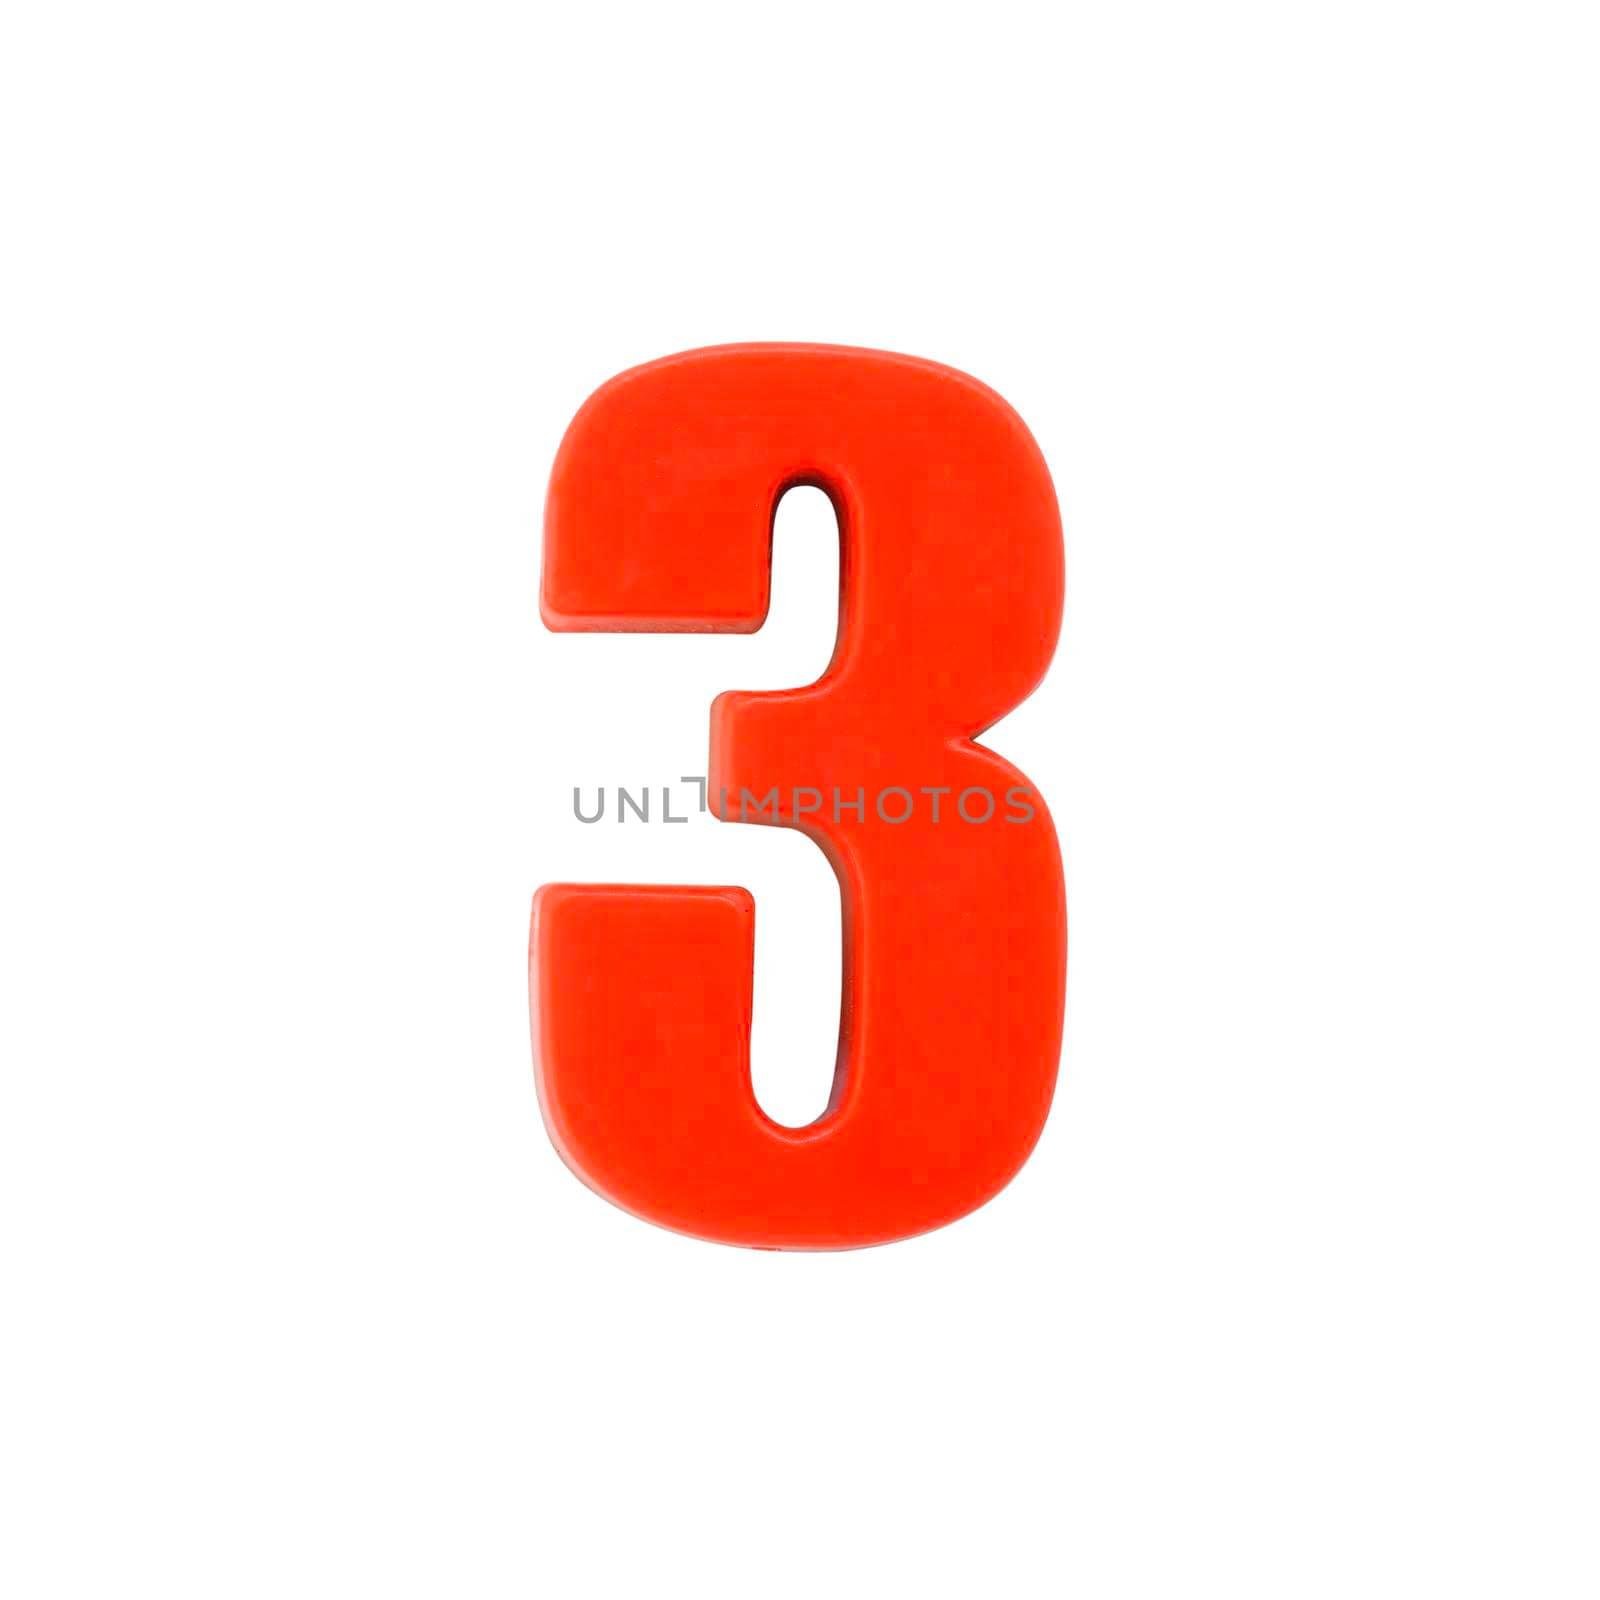 Shot of a number three made of red plastic with clipping path